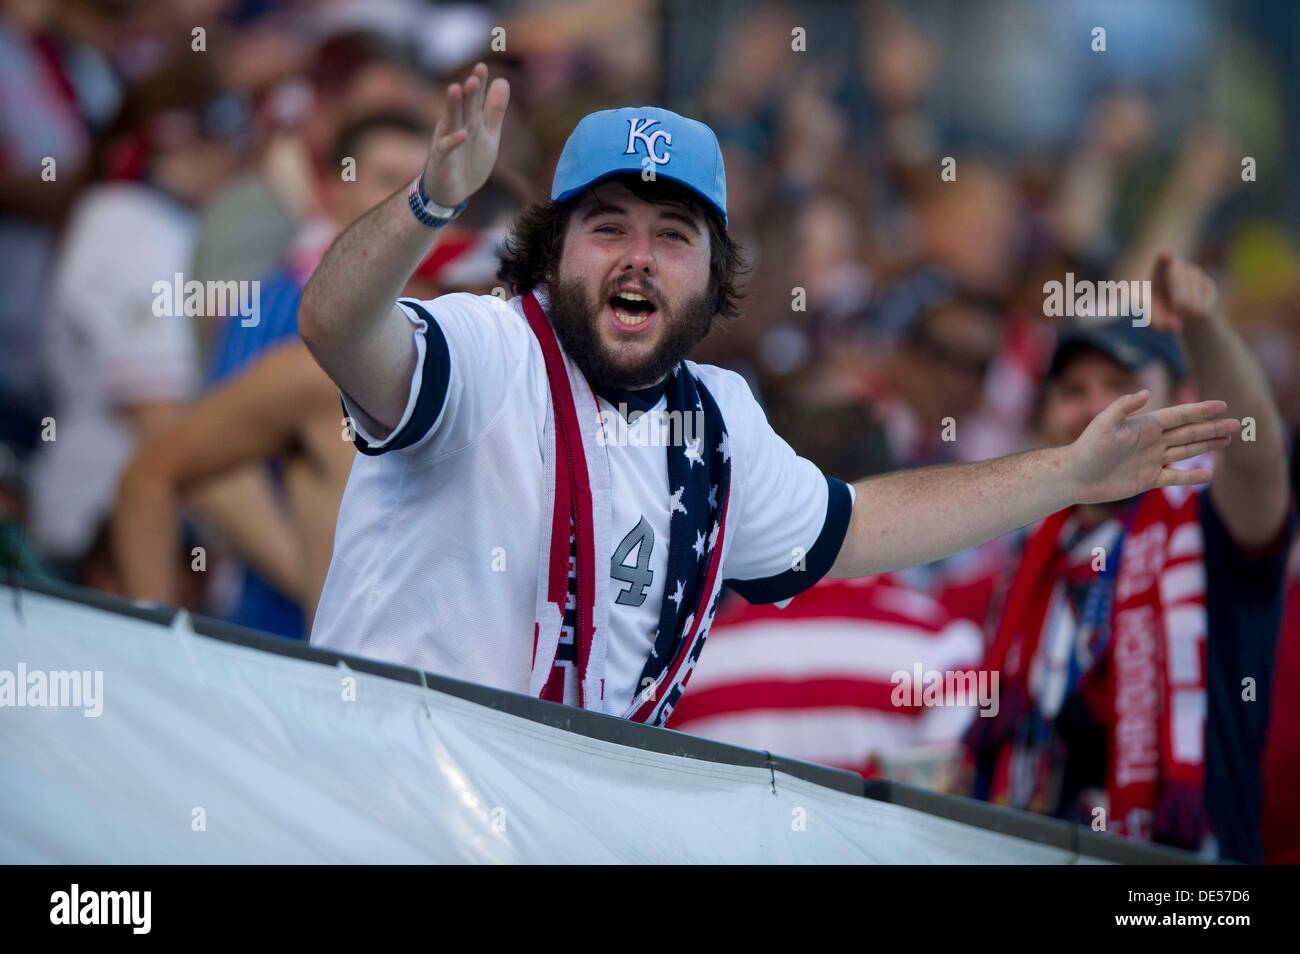 Columbus, Ohio, USA. 10th Sep, 2013. September 10, 2013: A soccer fan cheers during the U.S. Men's National Team vs. Mexico National Team- World Cup Qualifier match at Columbus Crew Stadium - Columbus, OH. The United States Men's National Team defeated The Mexico National Team 2-0 and clinched a spot for the World Cup in Brazil. © csm/Alamy Live News Stock Photo